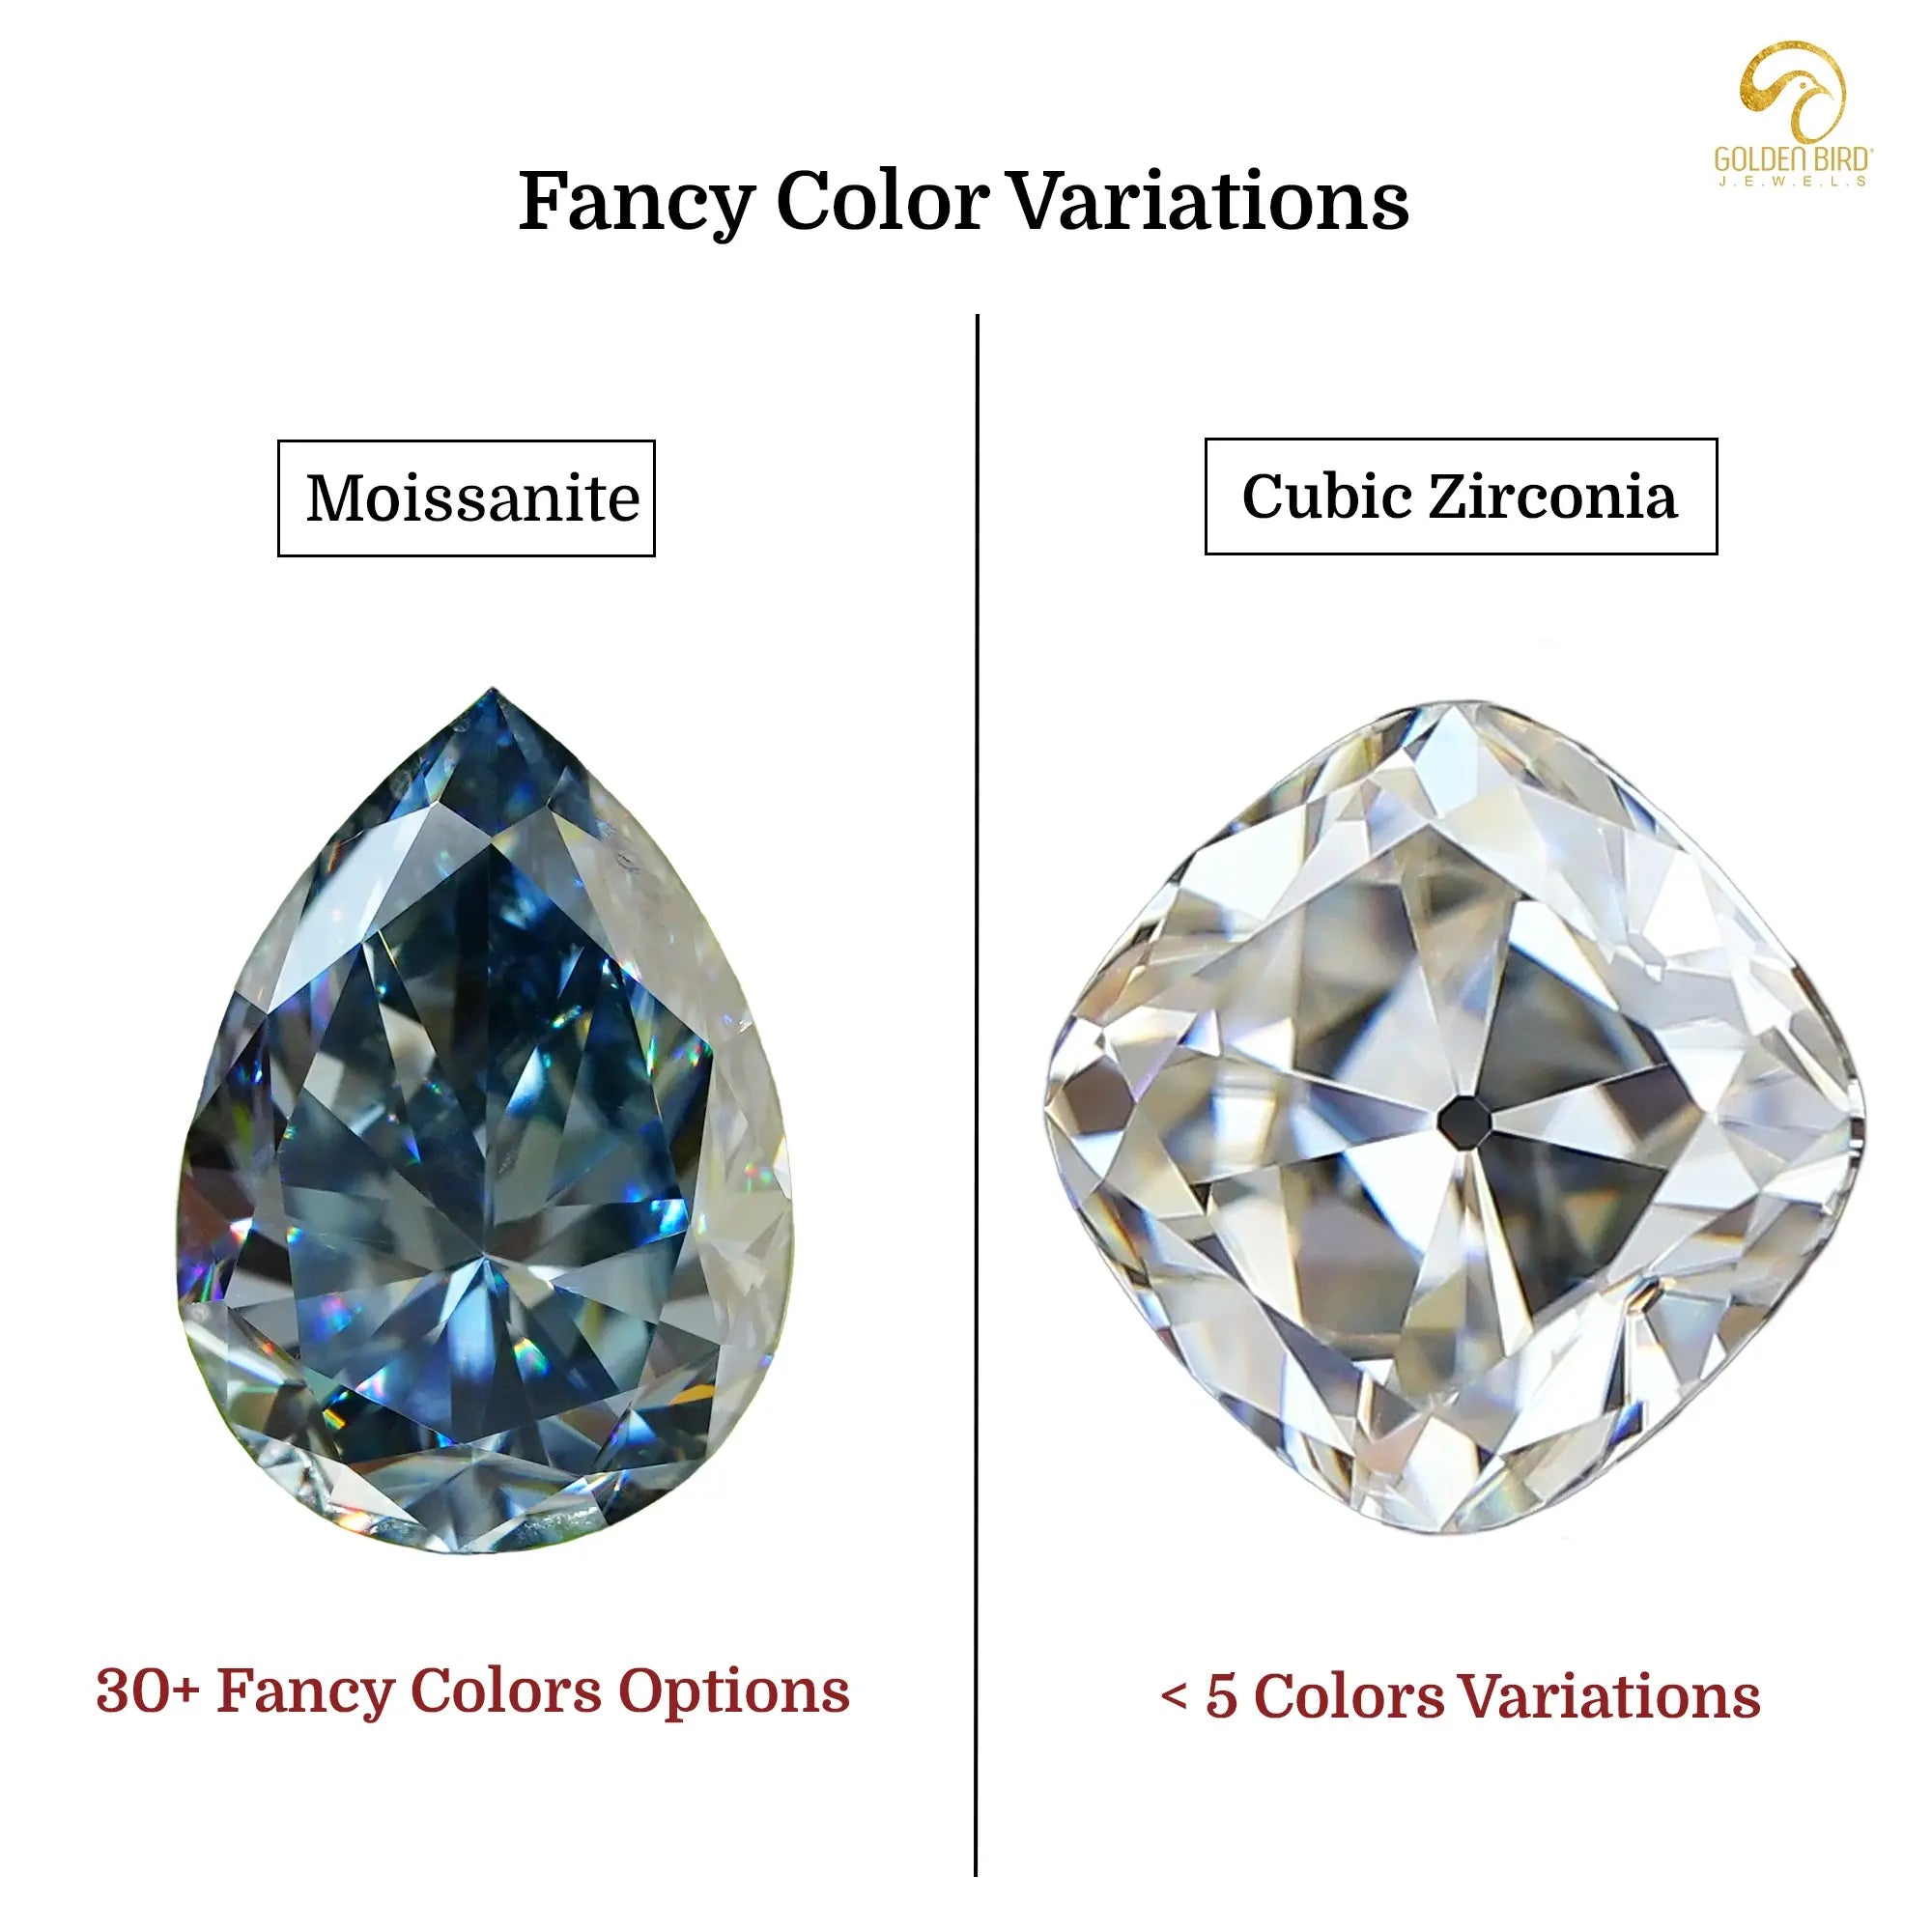 Fancy colores variations and options in moissanite and cubic zirconia diamond simulants